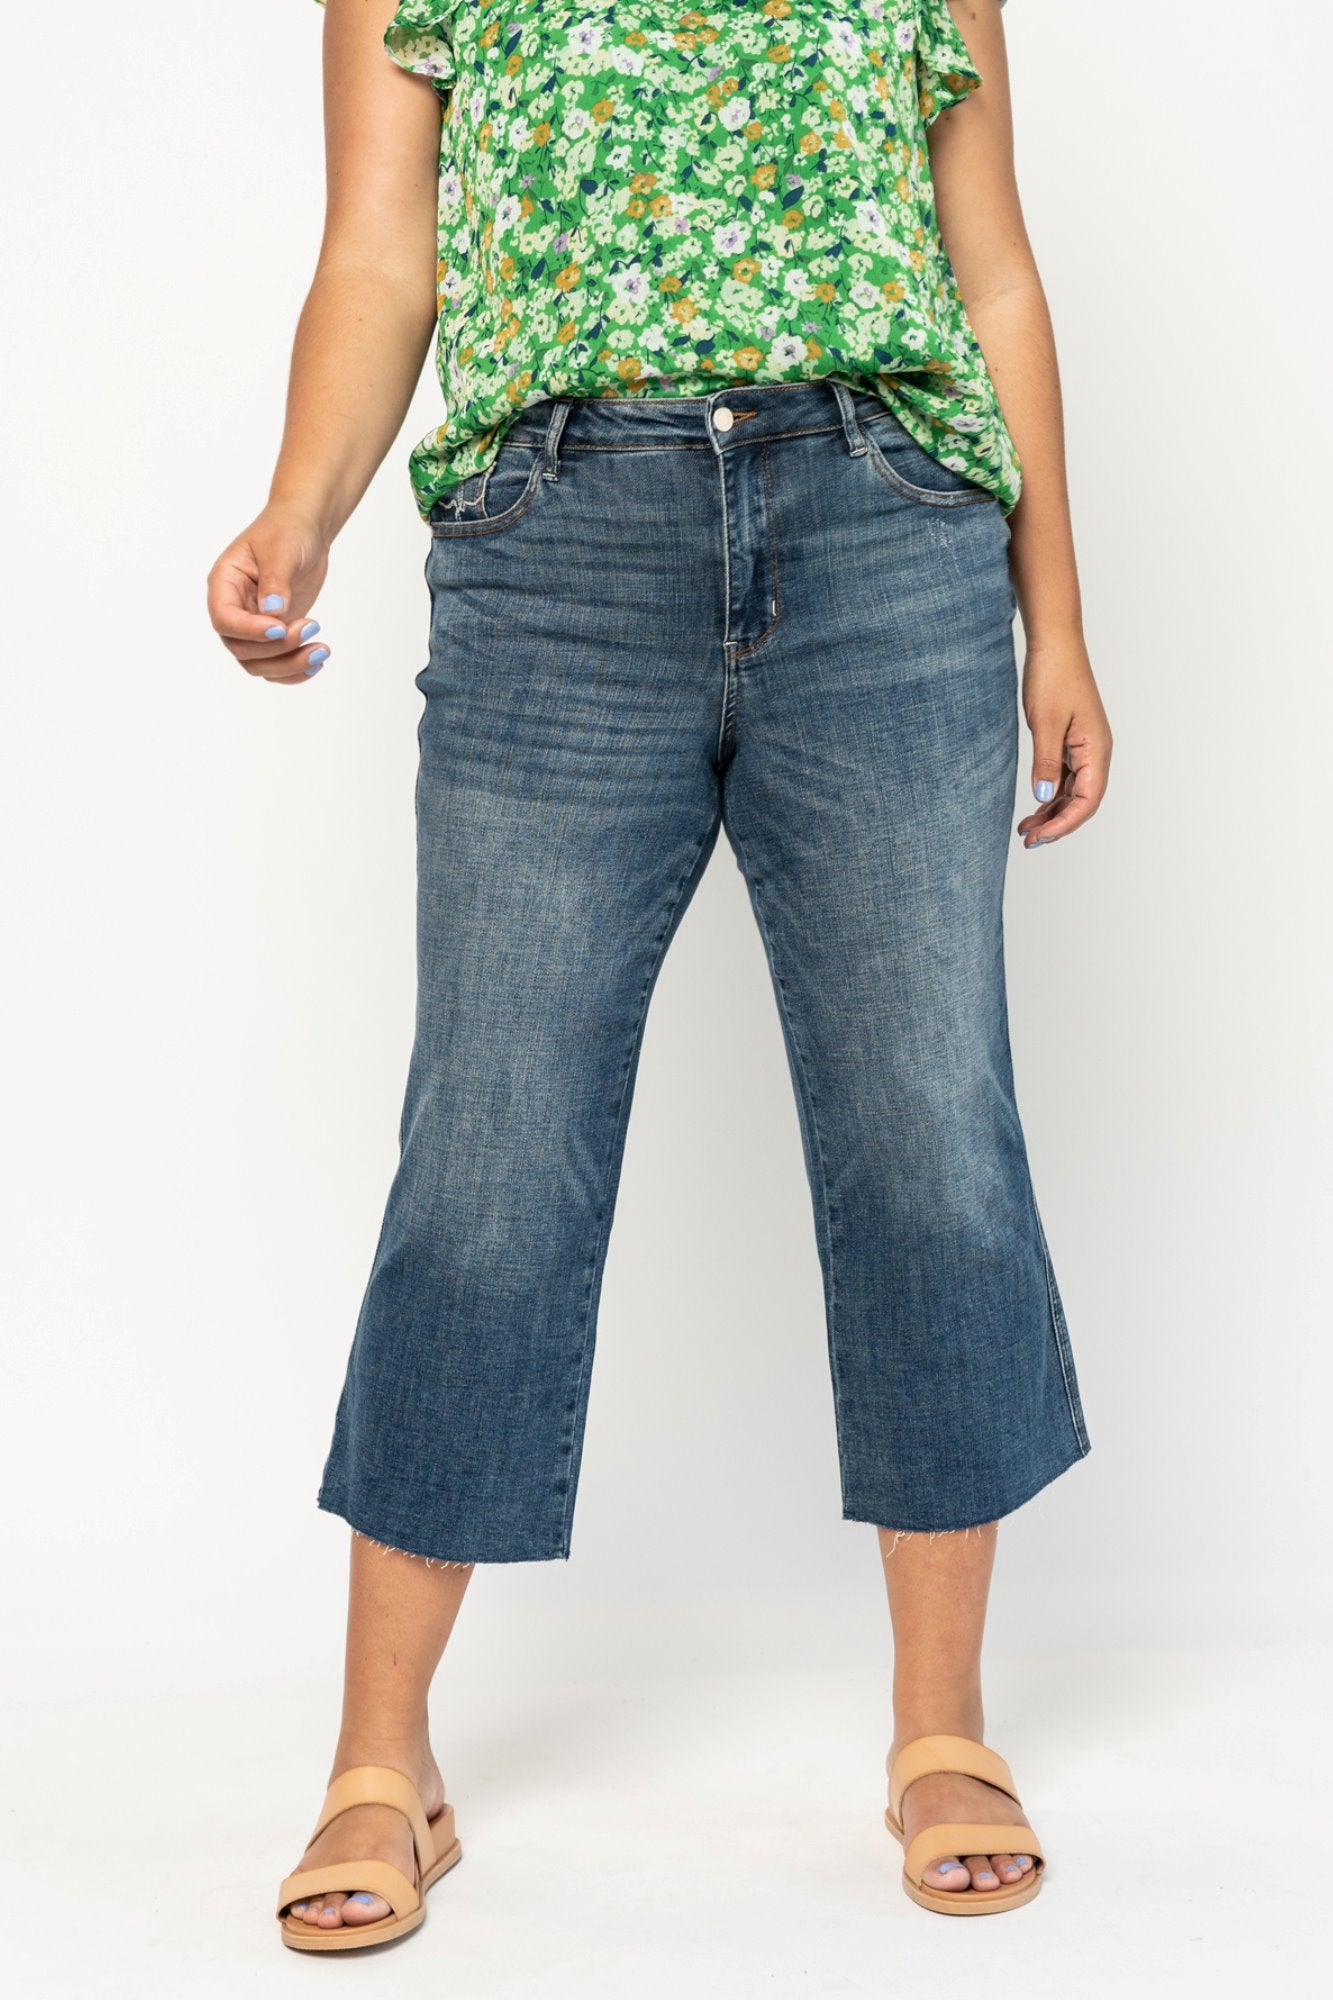 Kendra Jeans Holley Girl 